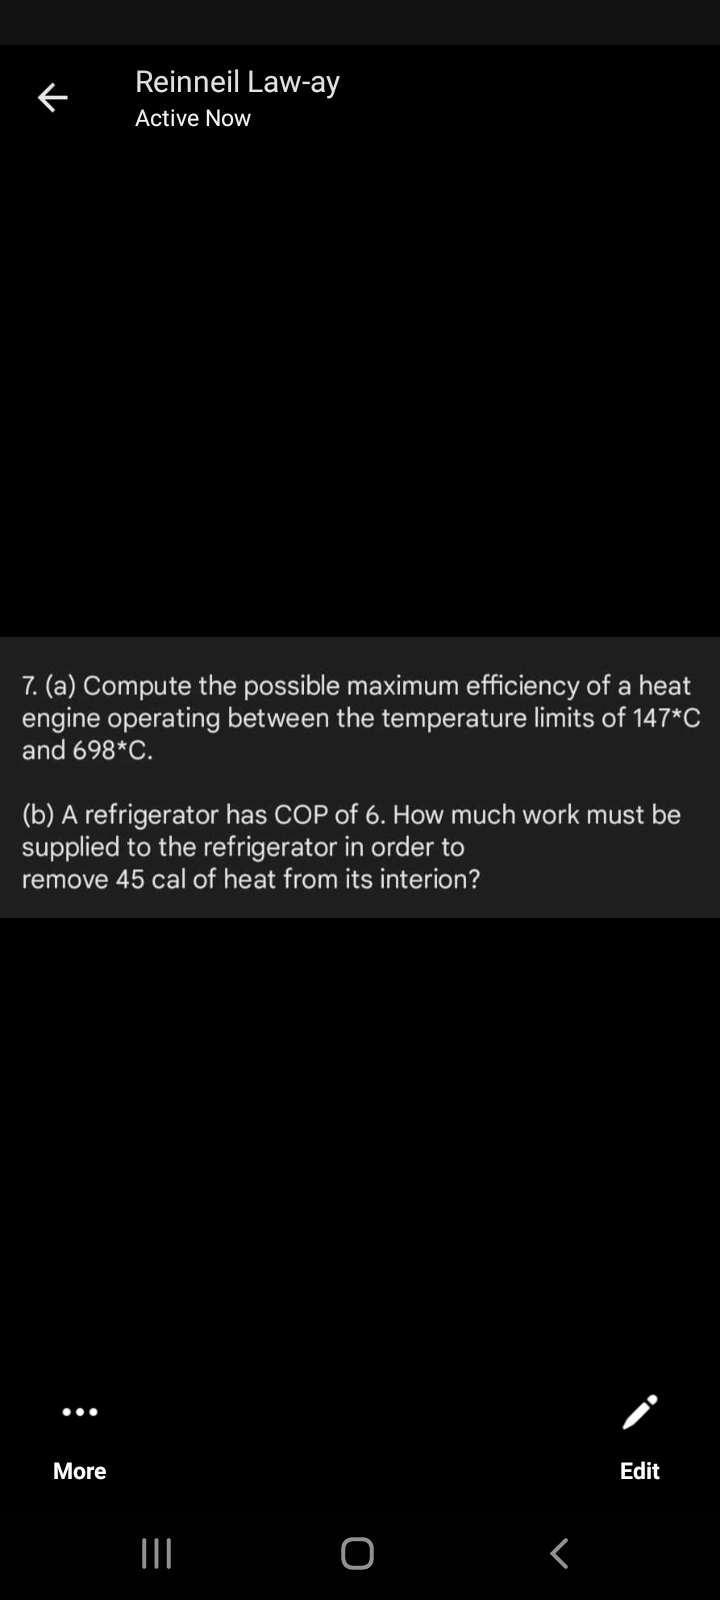 Reinneil Law-ay
Active Now
7. (a) Compute the possible maximum efficiency of a heat
engine operating between the temperature limits of 147*C
and 698*C.
(b) A refrigerator has COP of 6. How much work must be
supplied to the refrigerator in order to
remove 45 cal of heat from its interion?
•..
More
Edit
II
